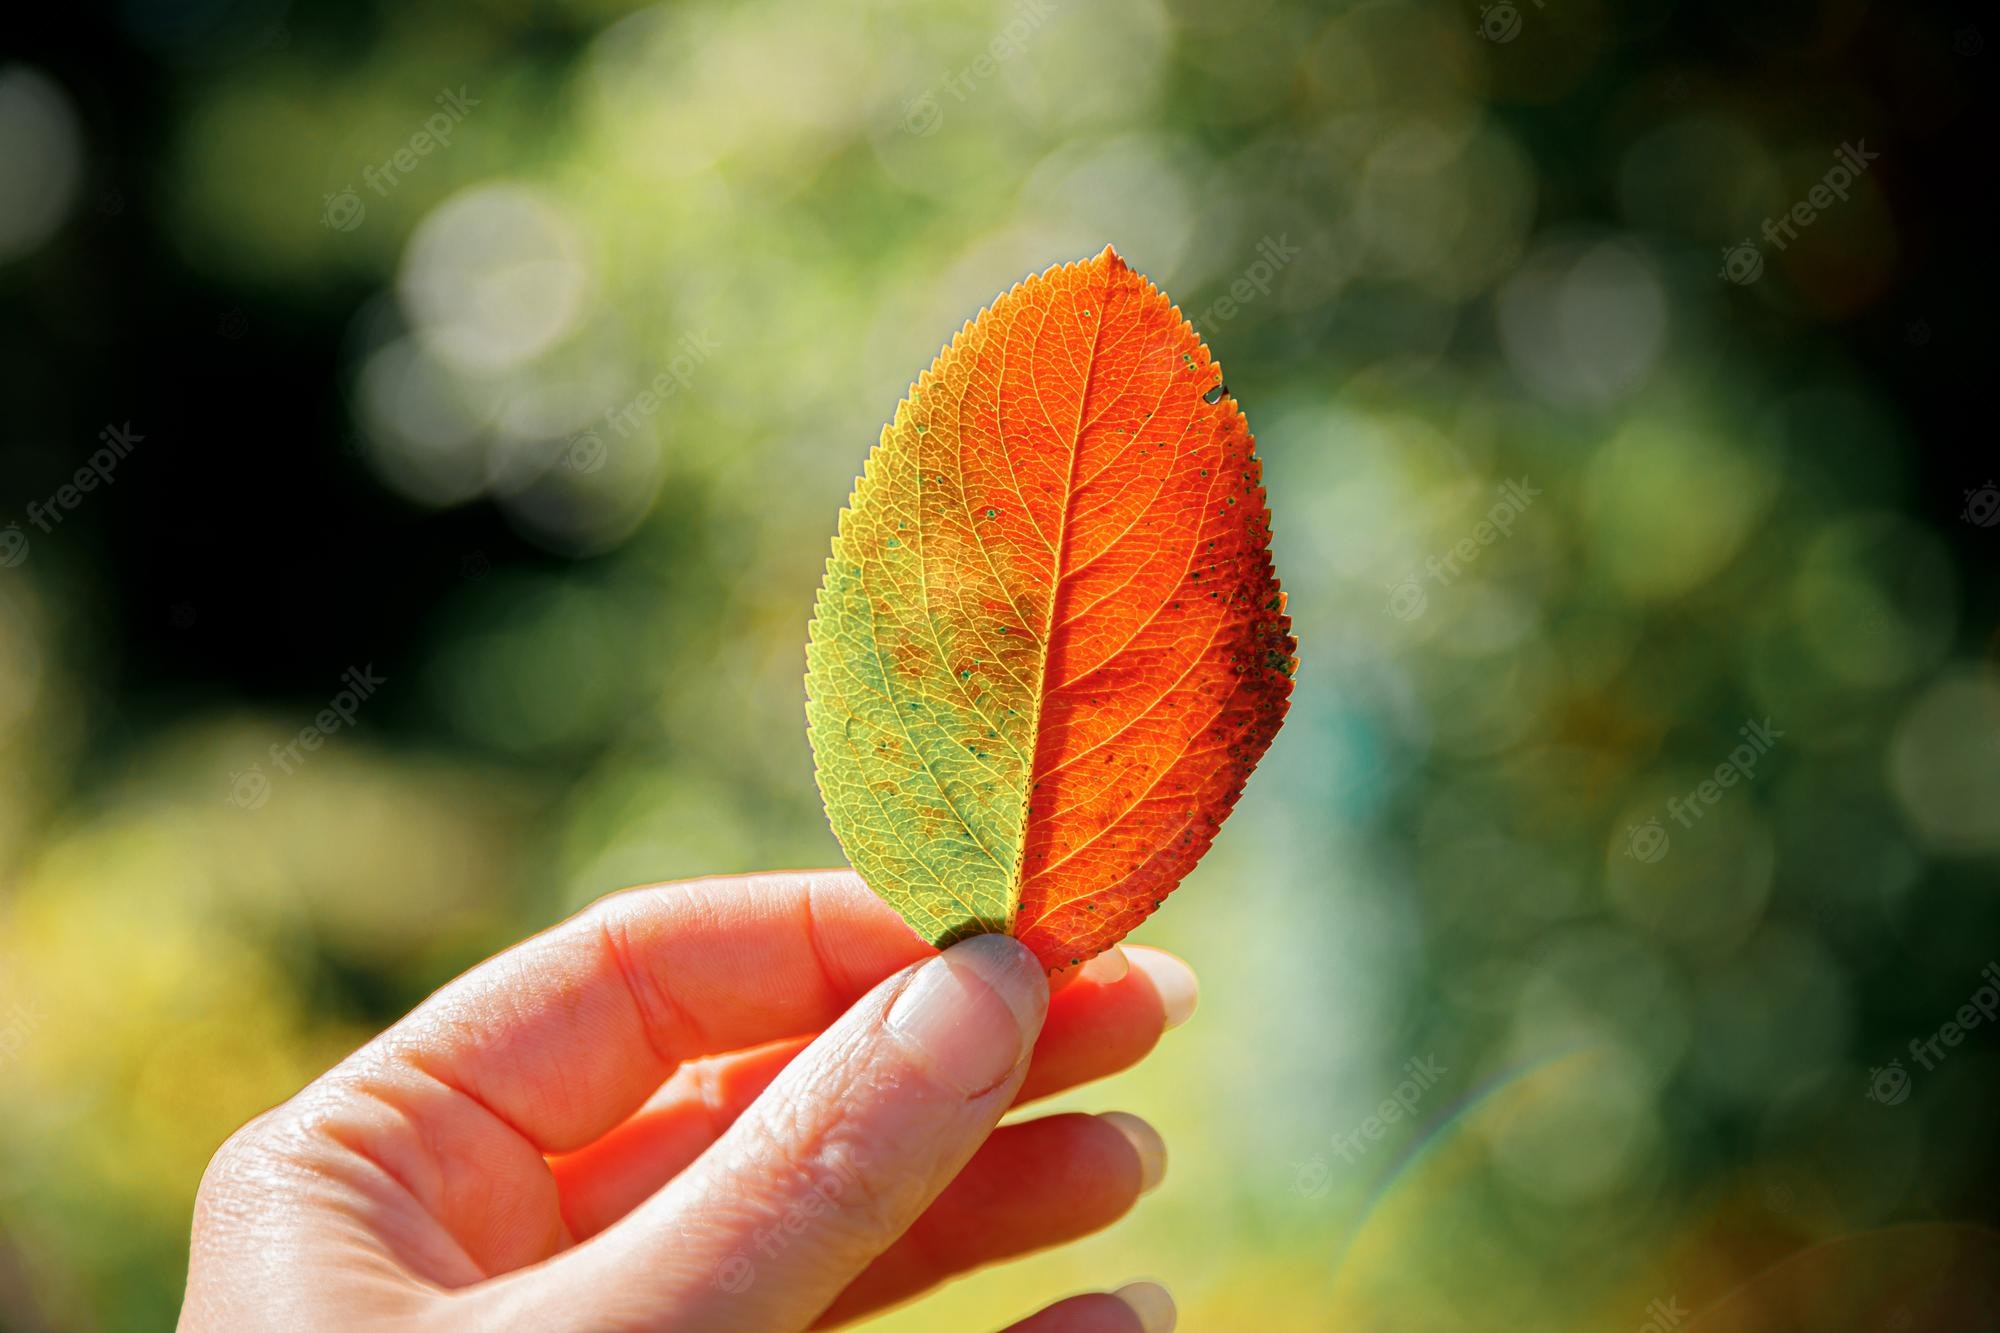 Premium Photo. Closeup natural autumn fall view woman hands holding red orange leaf on dark park background inspirational nature october or september wallpaper change of seasons concept